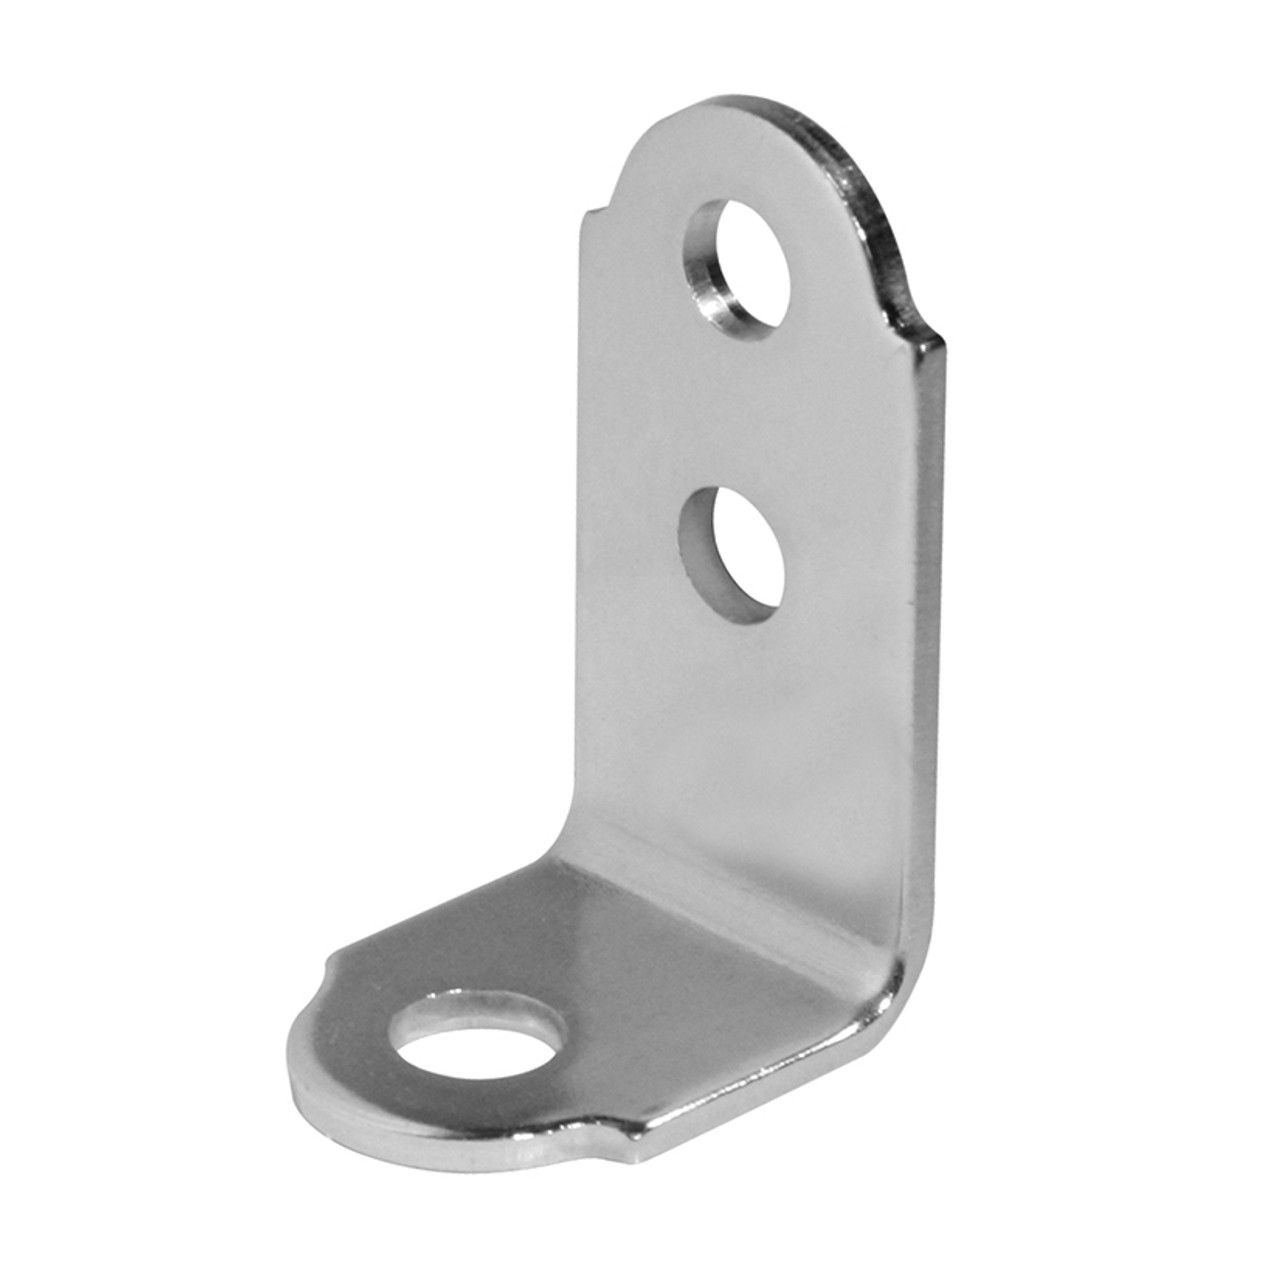 Through-Hole Style "L" Bracket - Stainless Steel  11303